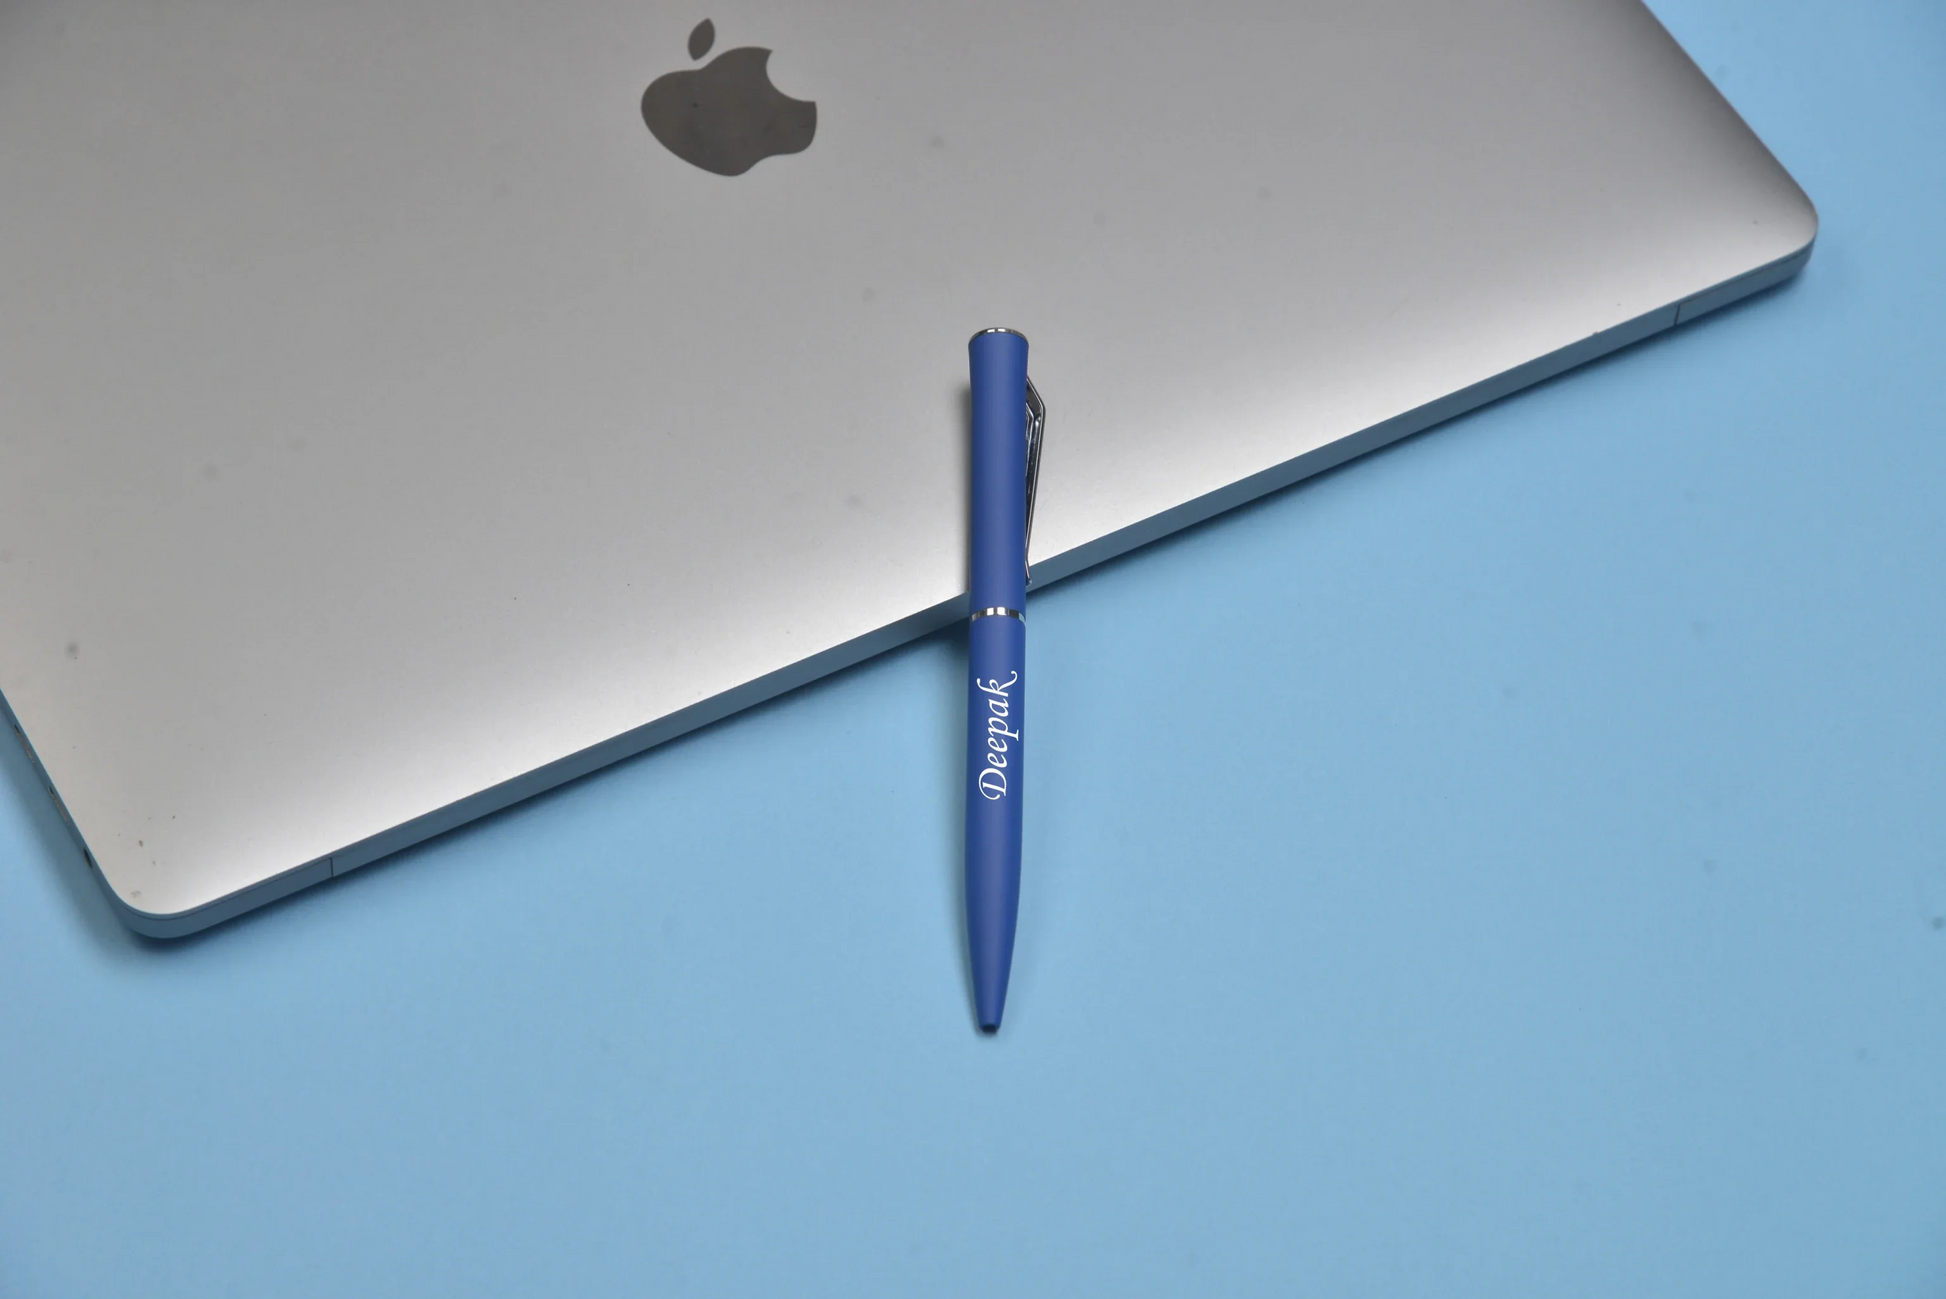 This classic metal pen is the perfect combination of style and functionality.